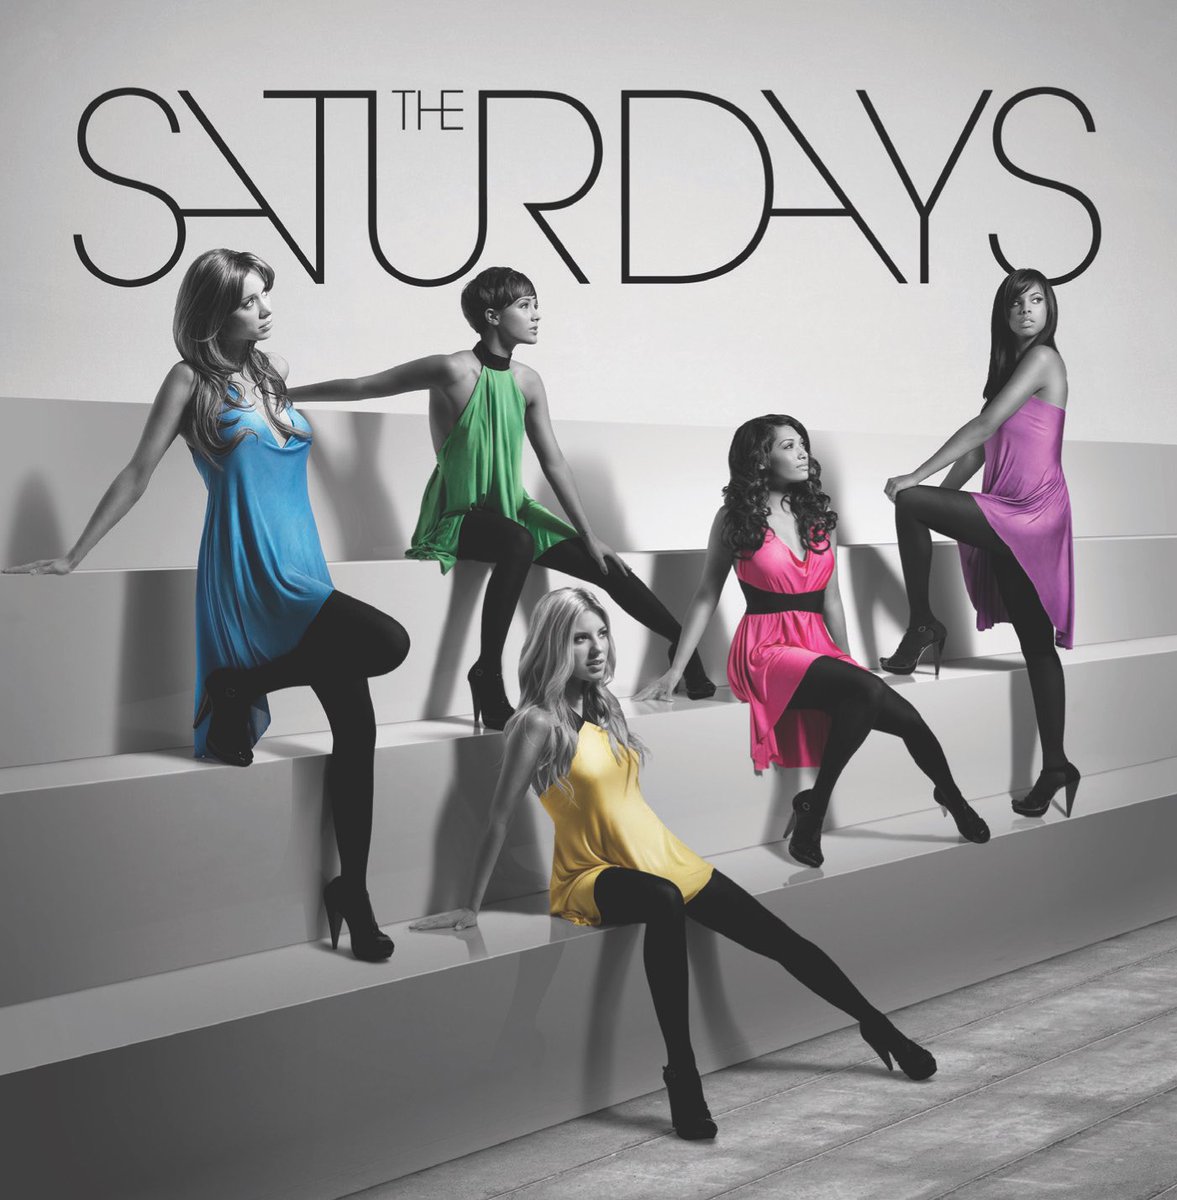 Today marks 15 years since the release of @TheSaturdays debut album #ChasingLights. The platinum certified album featured the hits If This Is Love, Up, Issues, Just Can't Get Enough and Work.